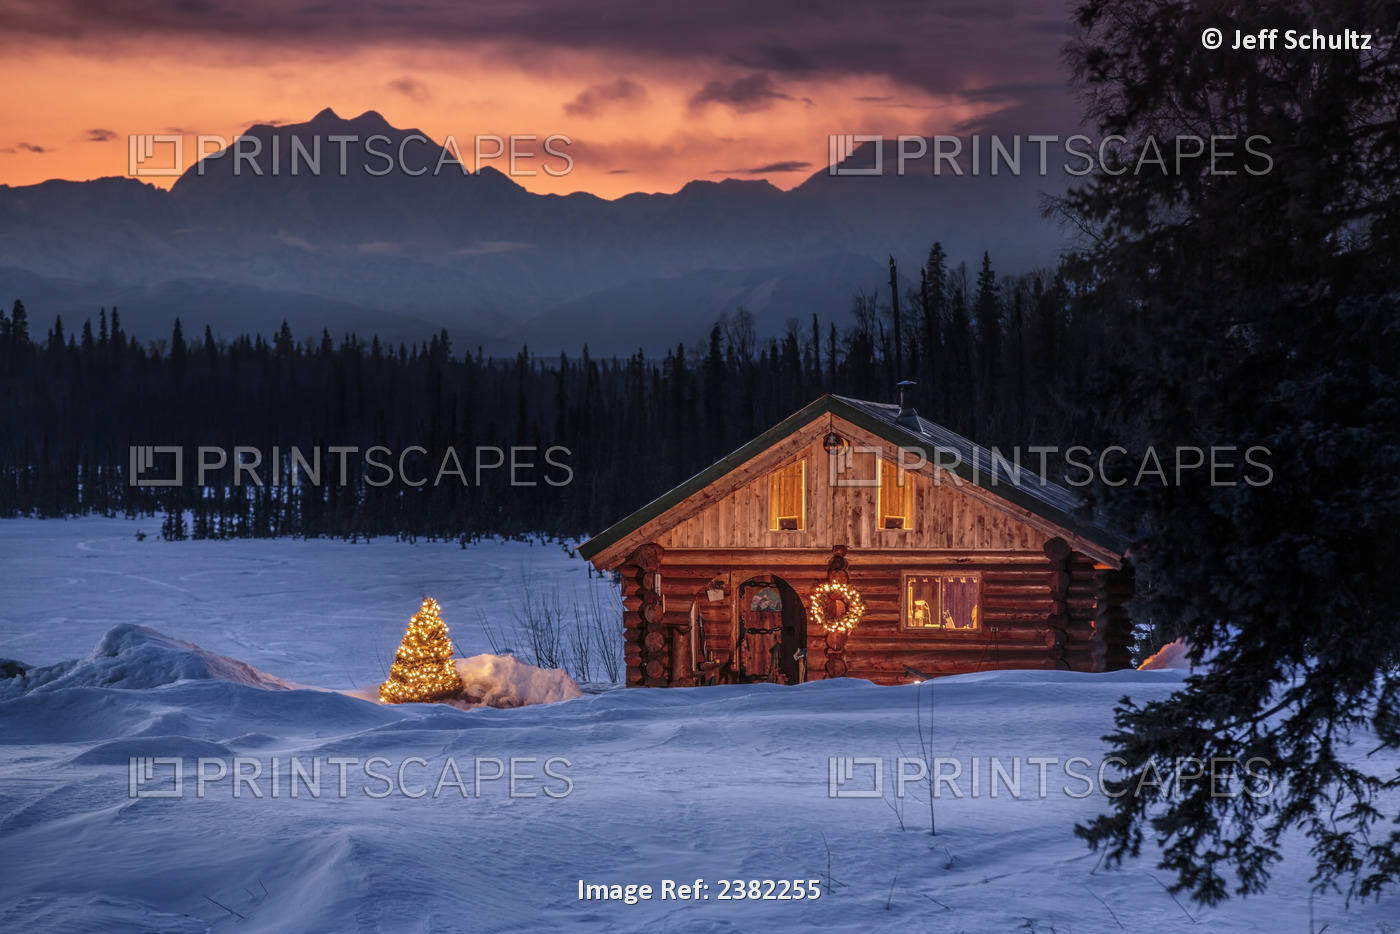 Log Cabin With Christmas Tree And Decorations, Mt. Mckinley And Alaska Range In ...